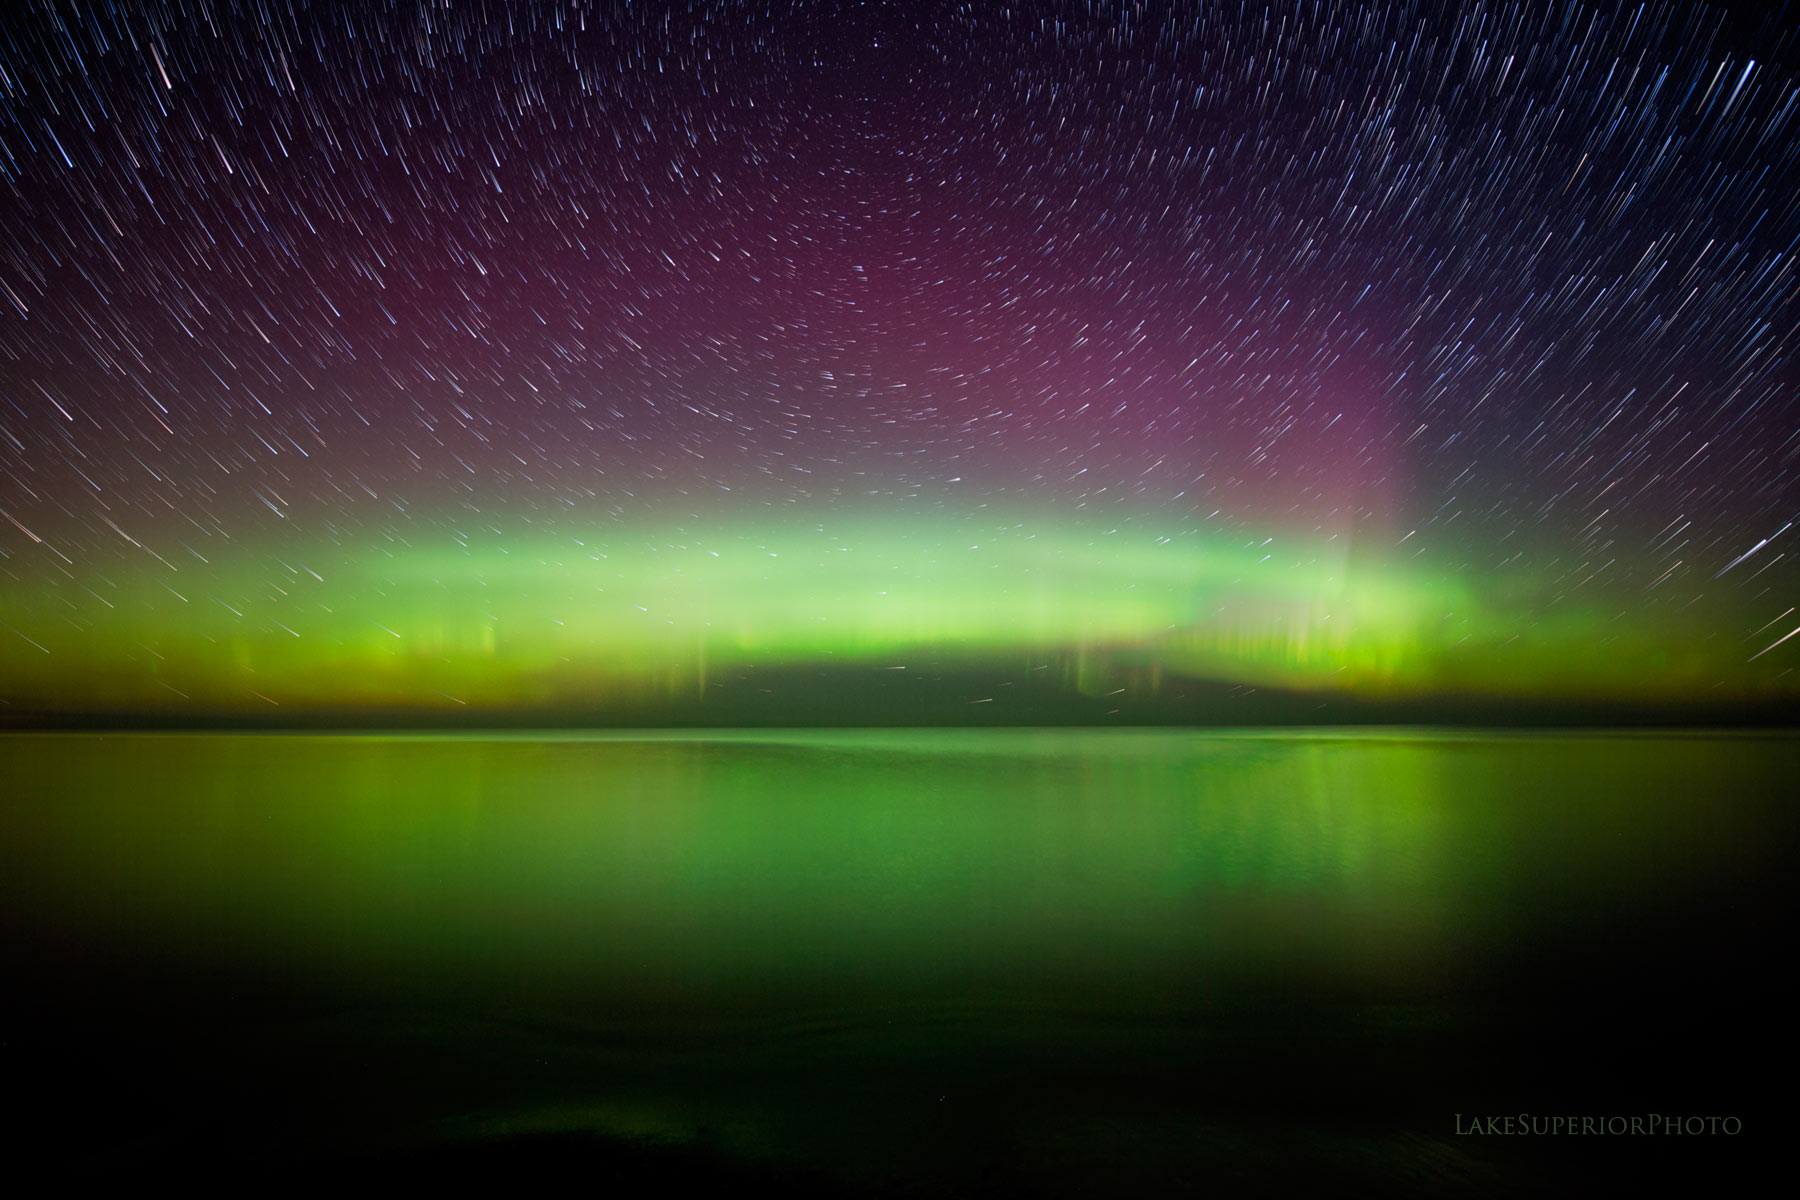 Aurora on 28 Aug. 2014 as seen over Lake Superior, from Marquette, MI (courtesy Lake Superior Photography).